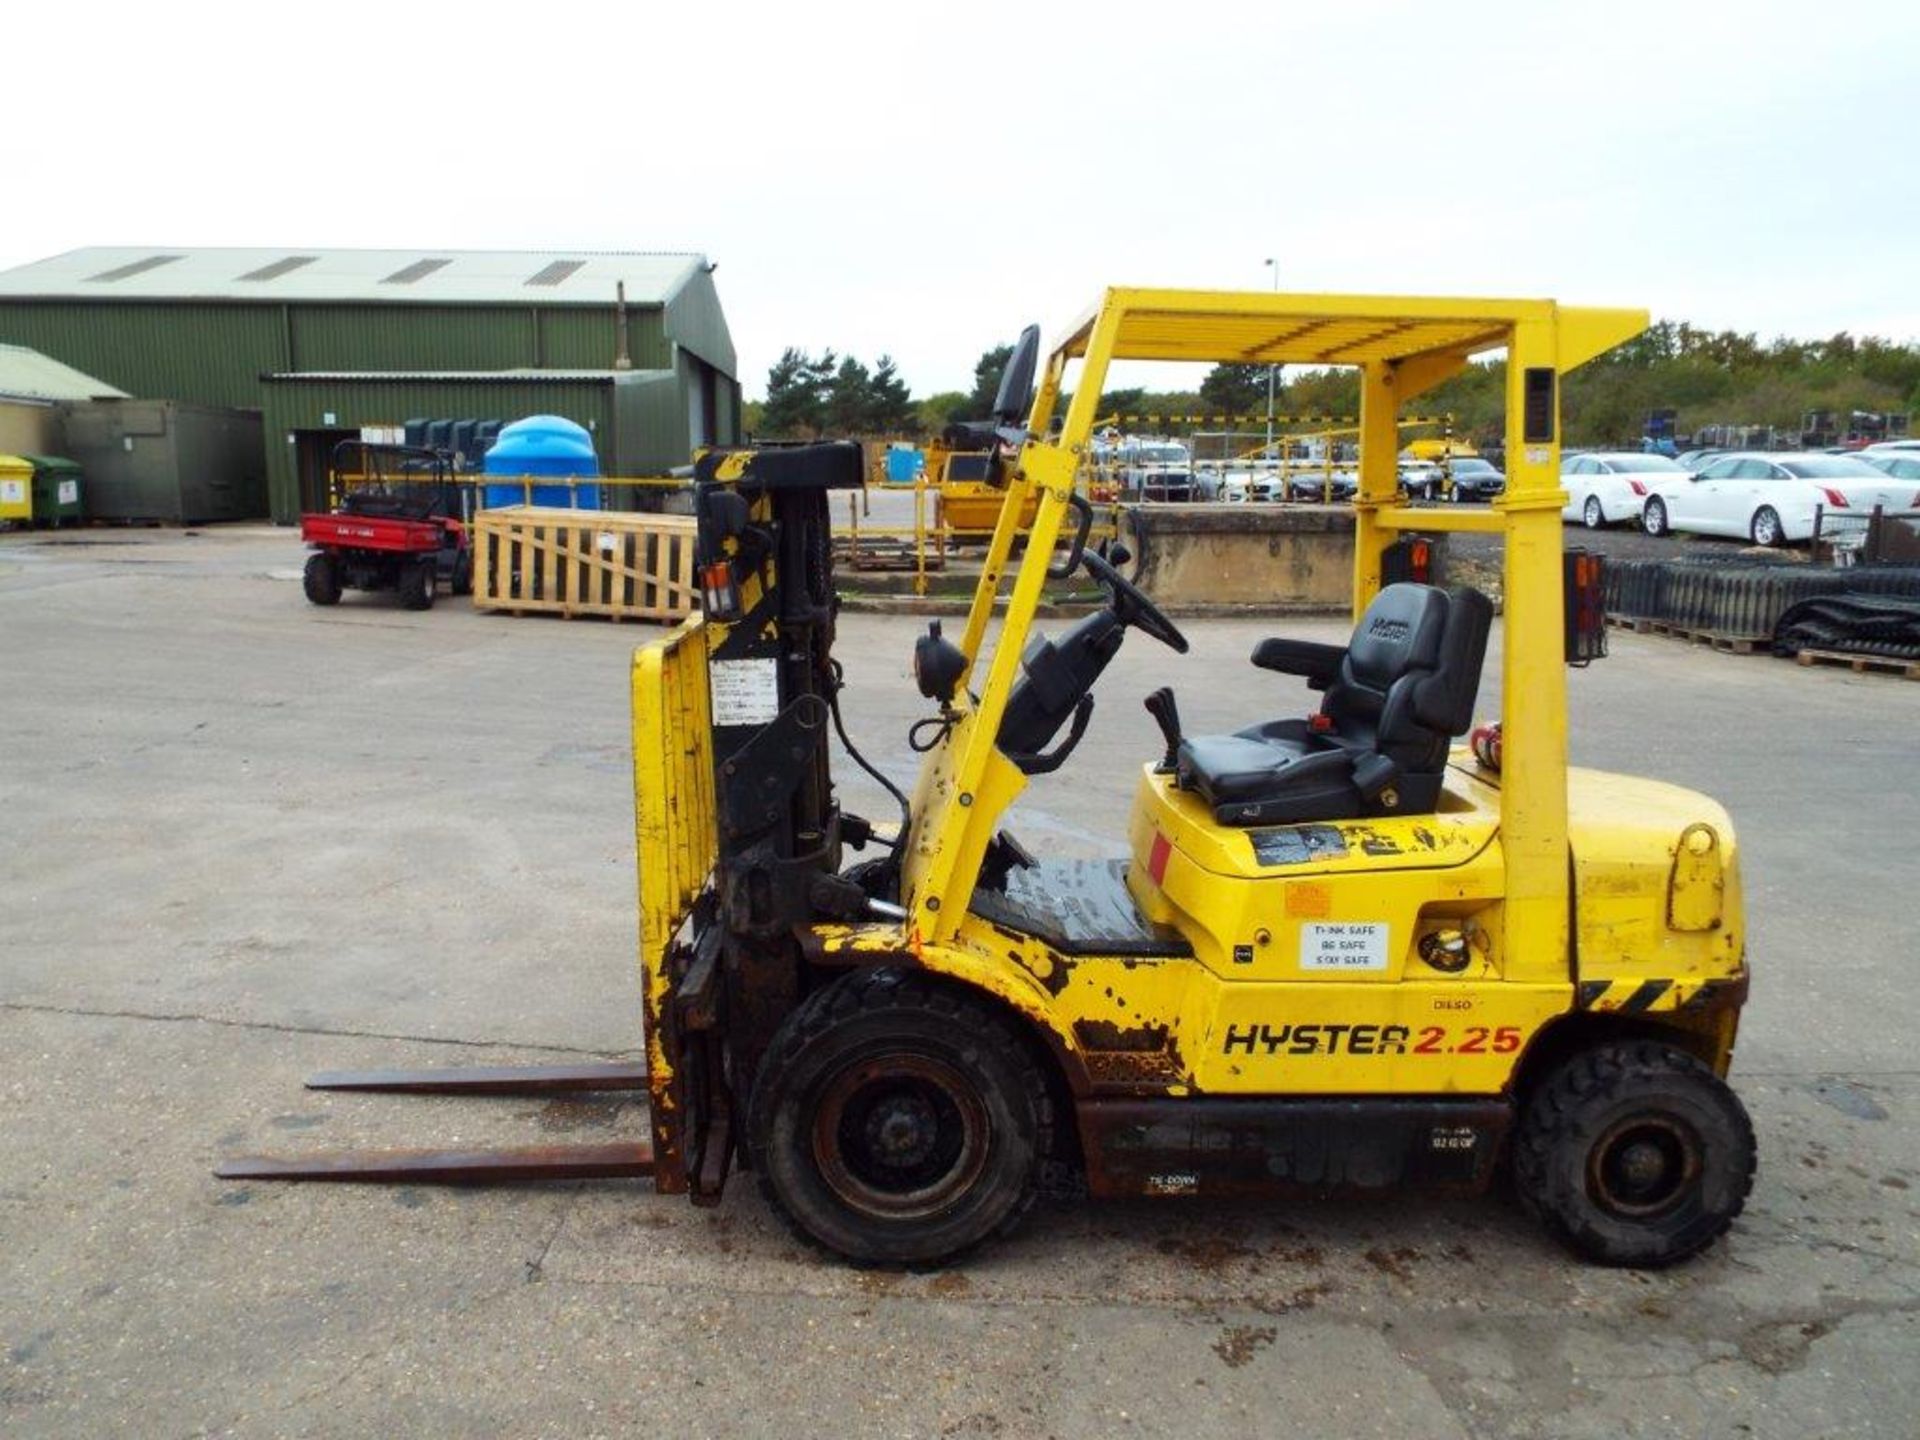 Hyster 2.25 Class C, Zone 2 Protected Diesel Container Forklift - Bild 3 aus 24